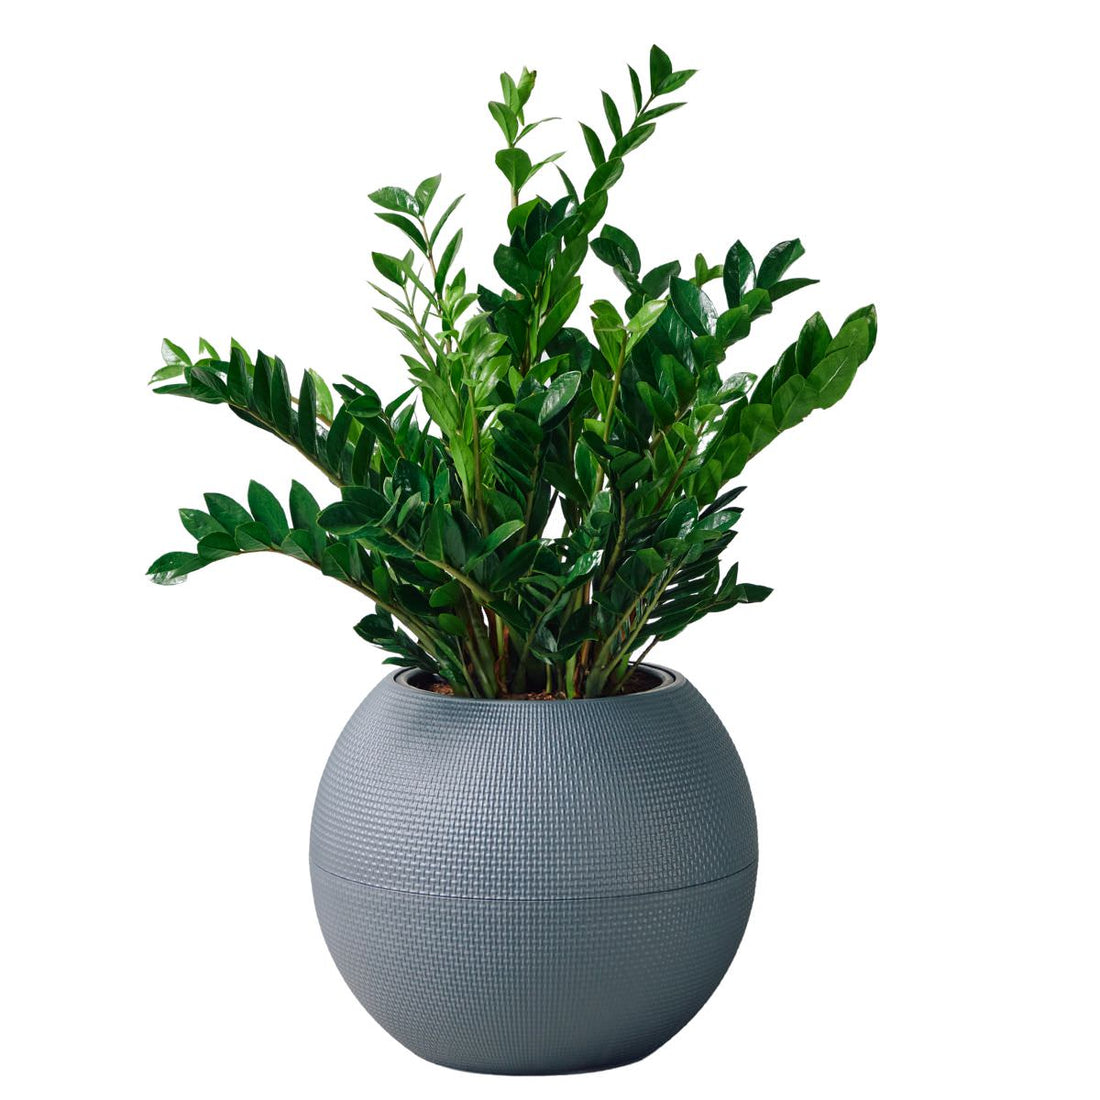 ZZ Plant Potted In Lechuza Puro Planter - Slate - My City Plants